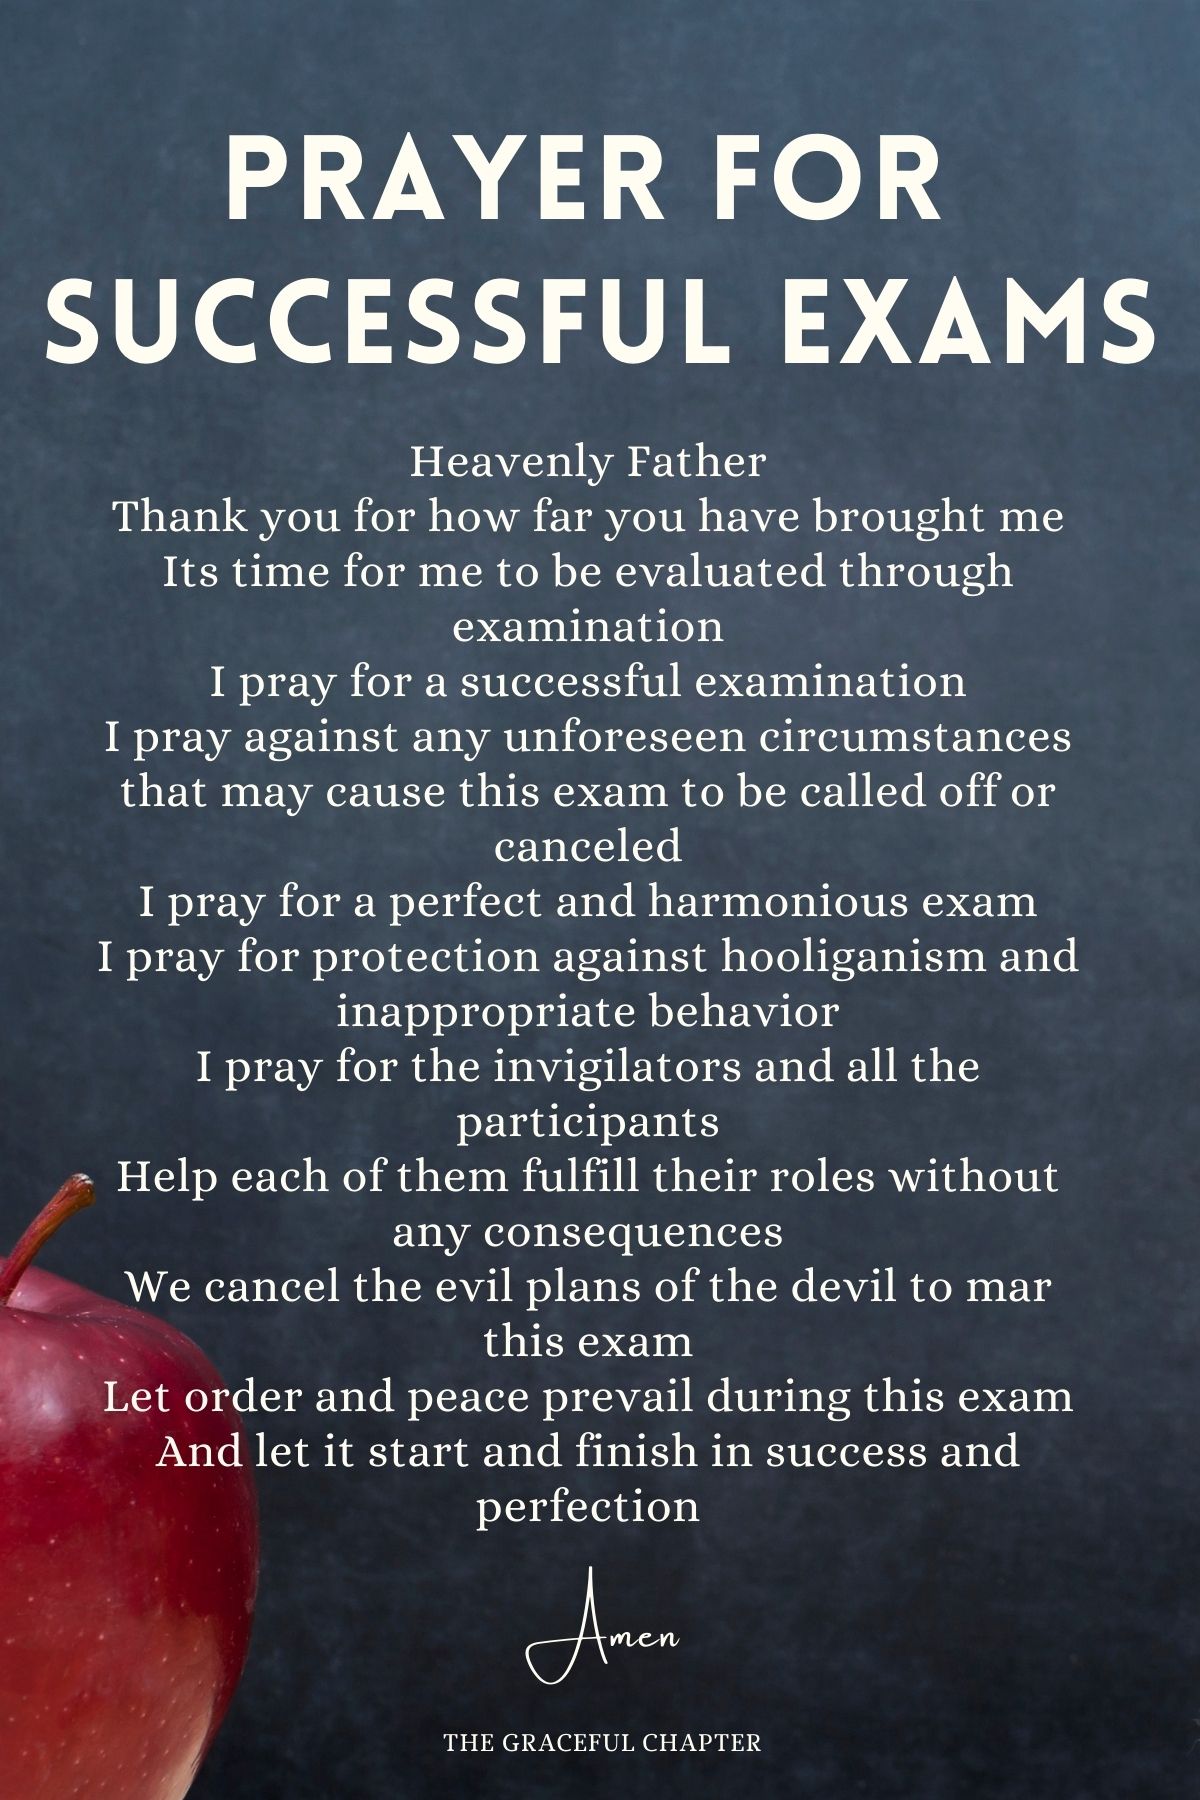 Prayer for Successful Exams -prayers for exams